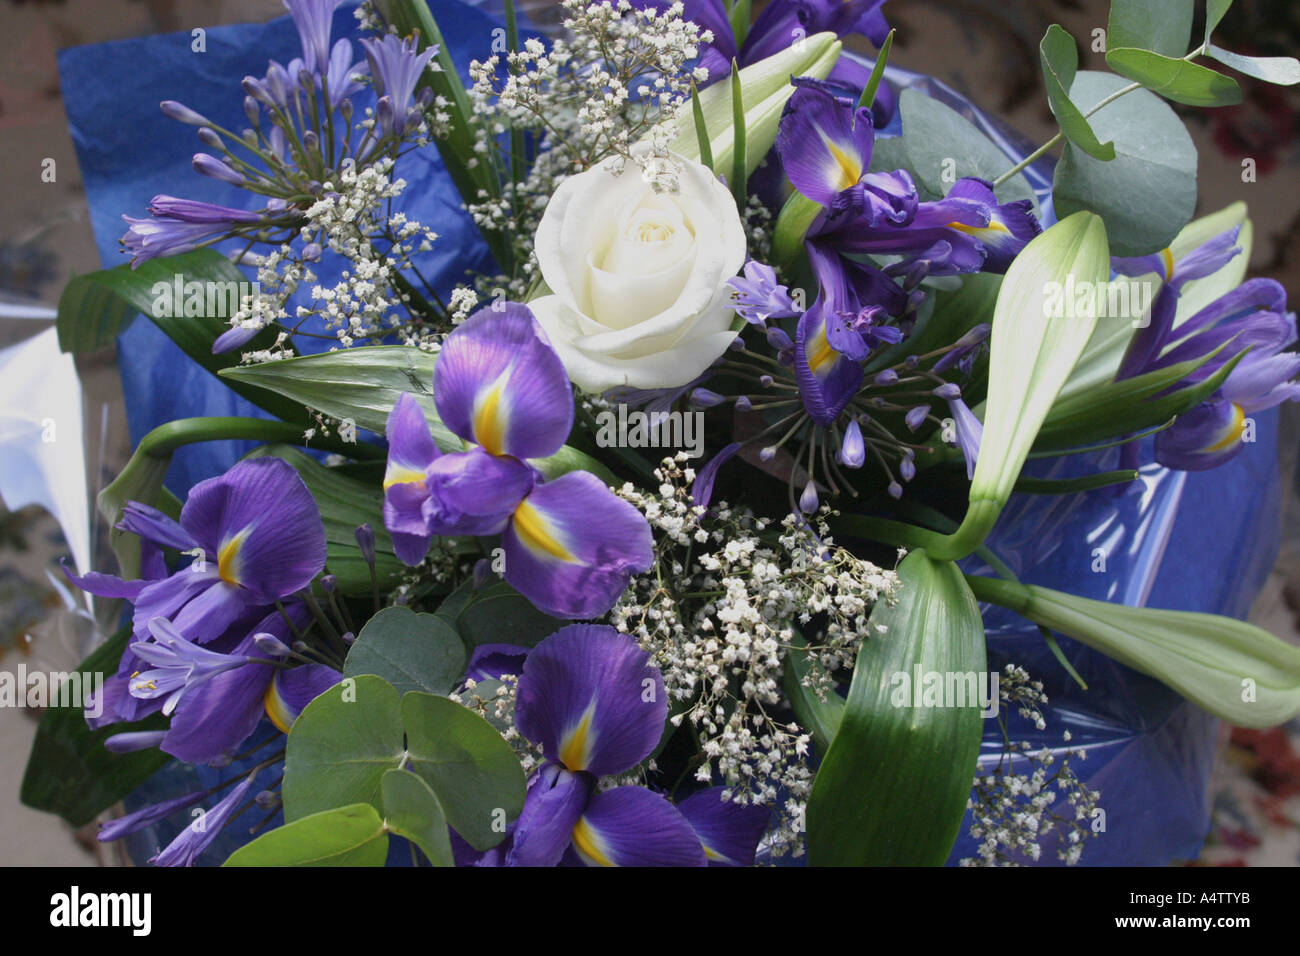 bouquet of Blue and white flowers close up Stock Photo